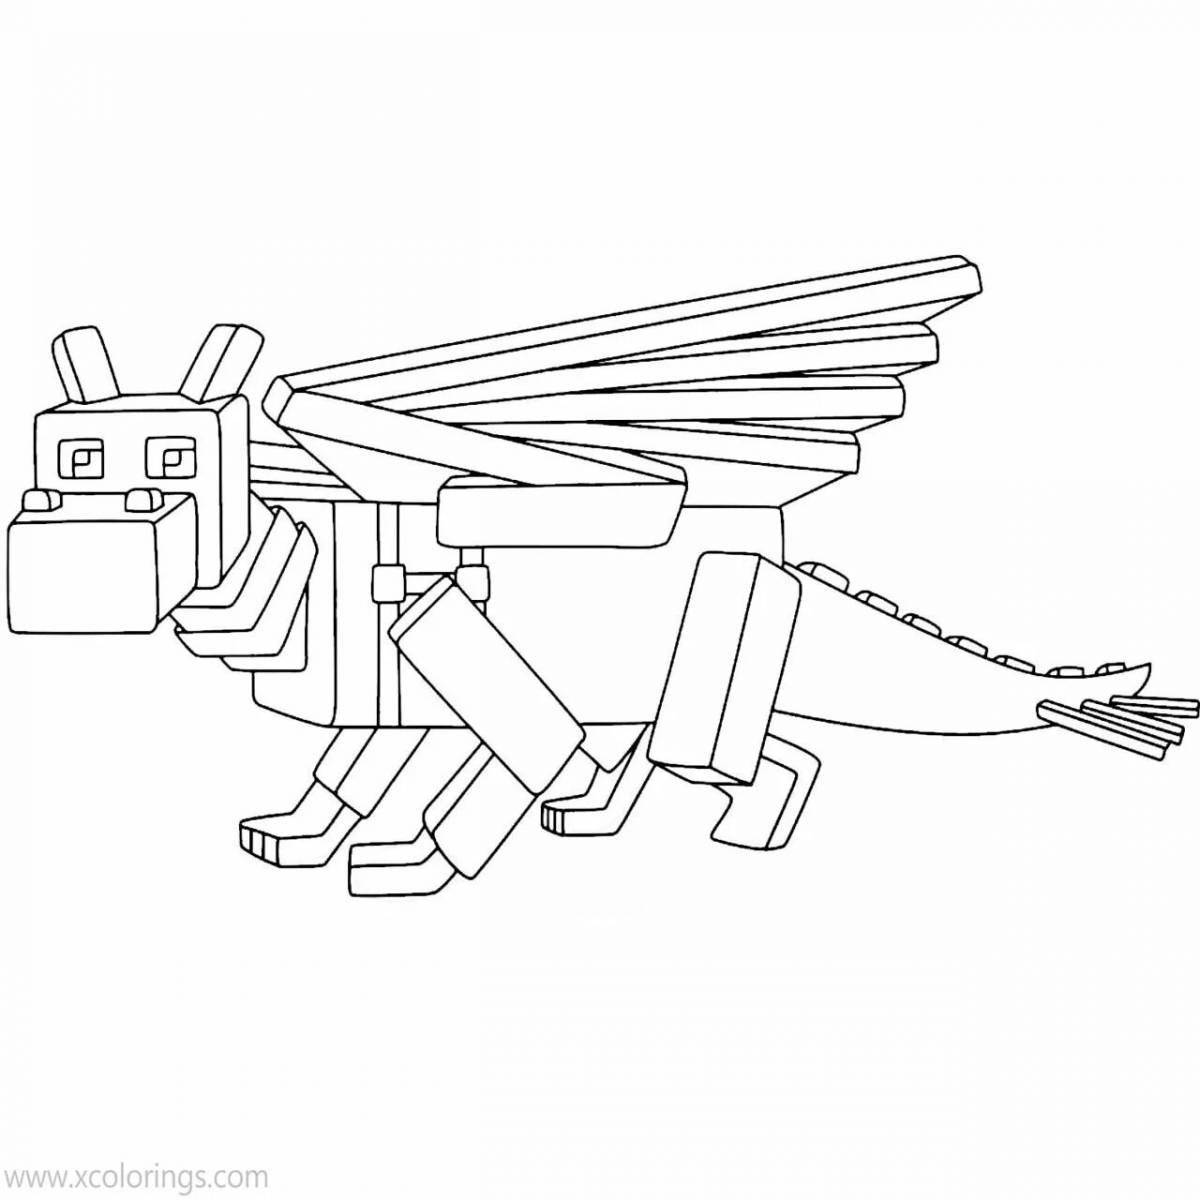 Exquisite ender dragon minecraft coloring page